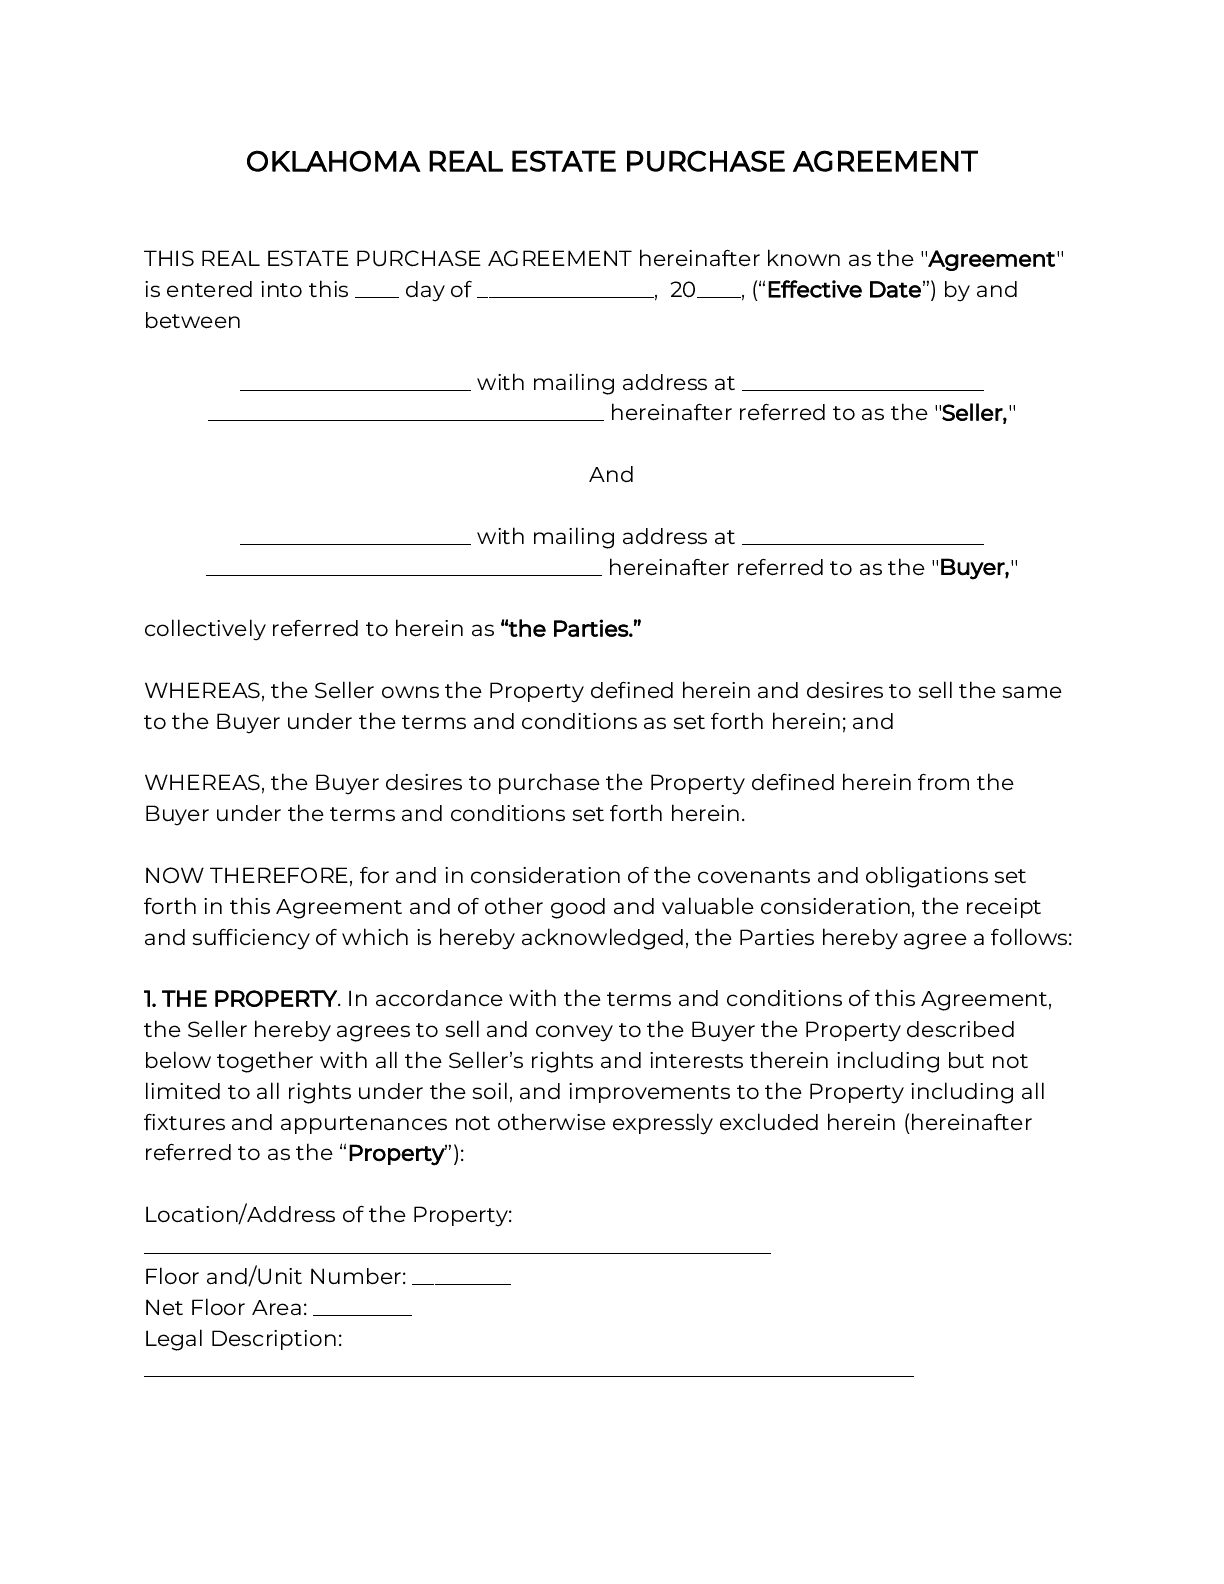 official-oklahoma-residential-purchase-agreement-2021